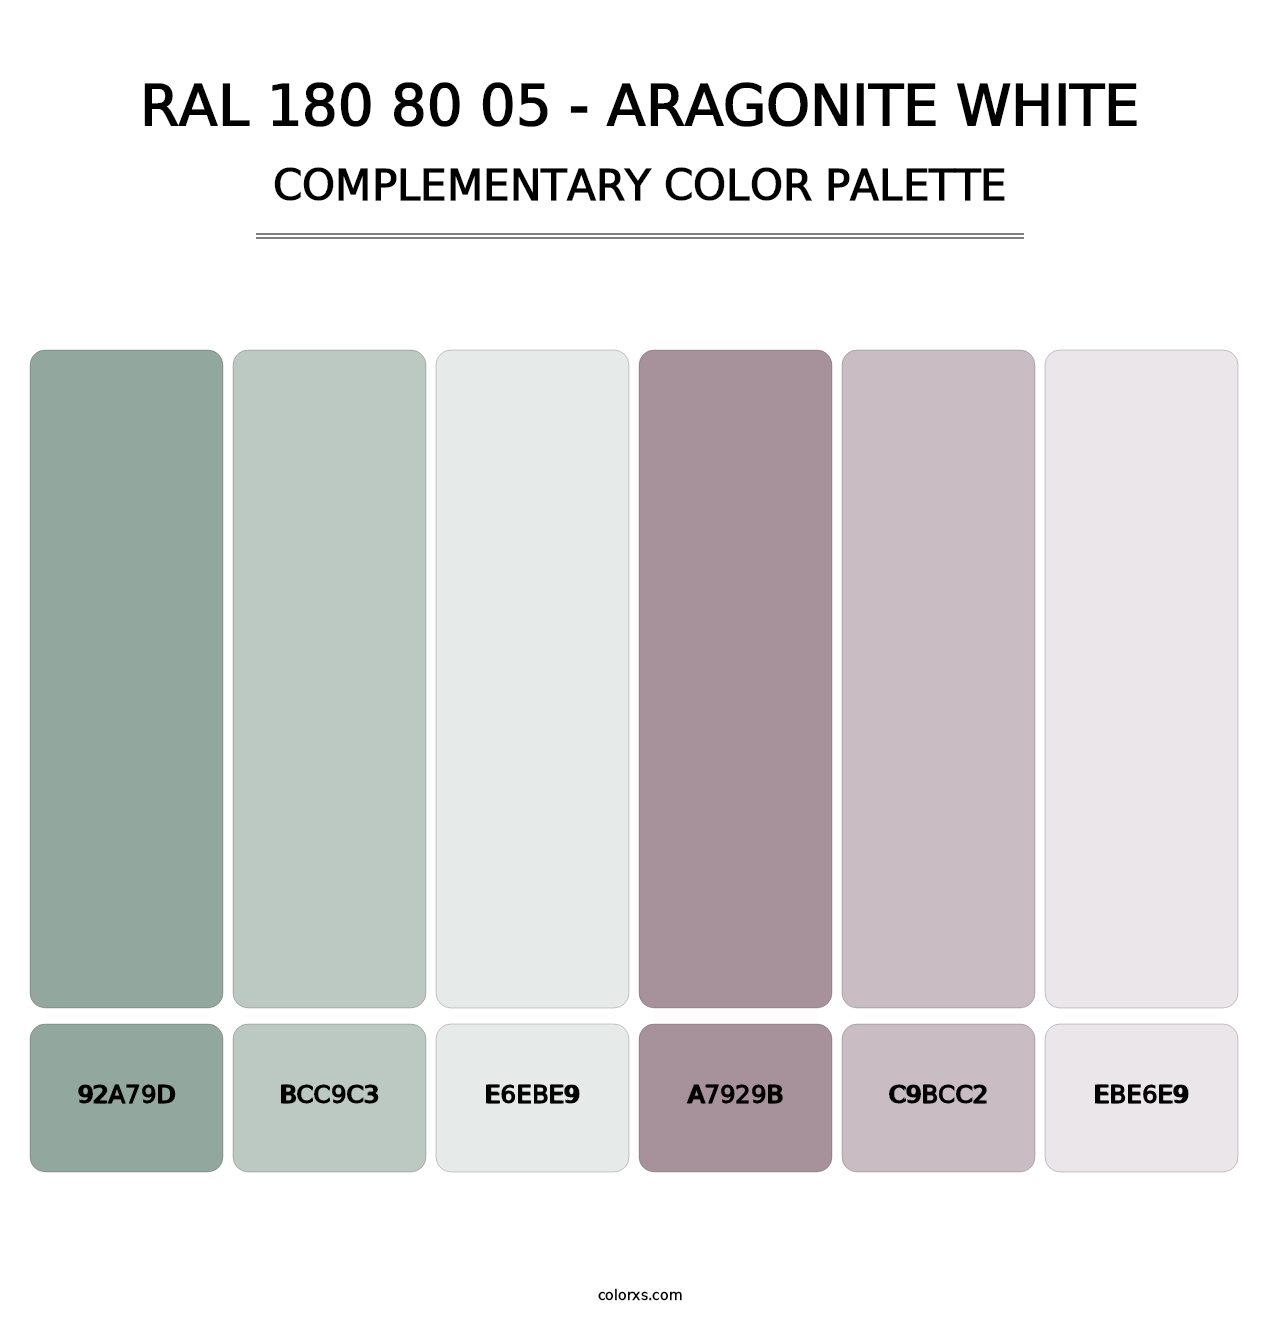 RAL 180 80 05 - Aragonite White - Complementary Color Palette